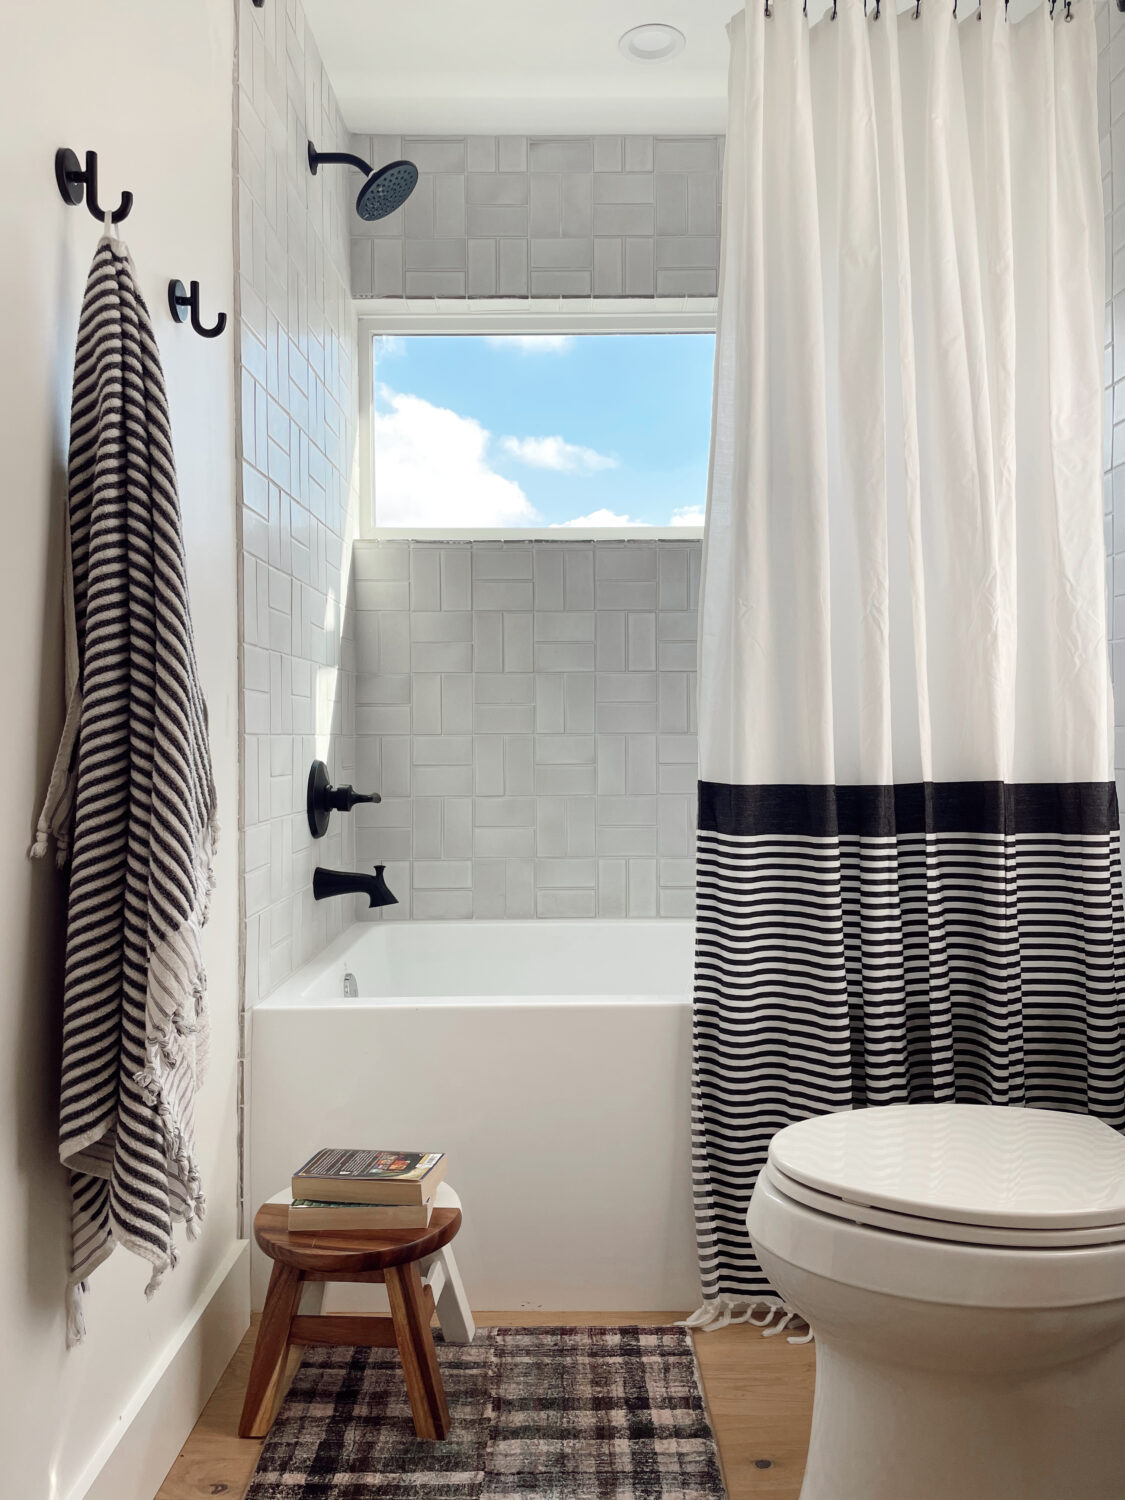 patterned tile, window in the shower, big tub, shower curtain